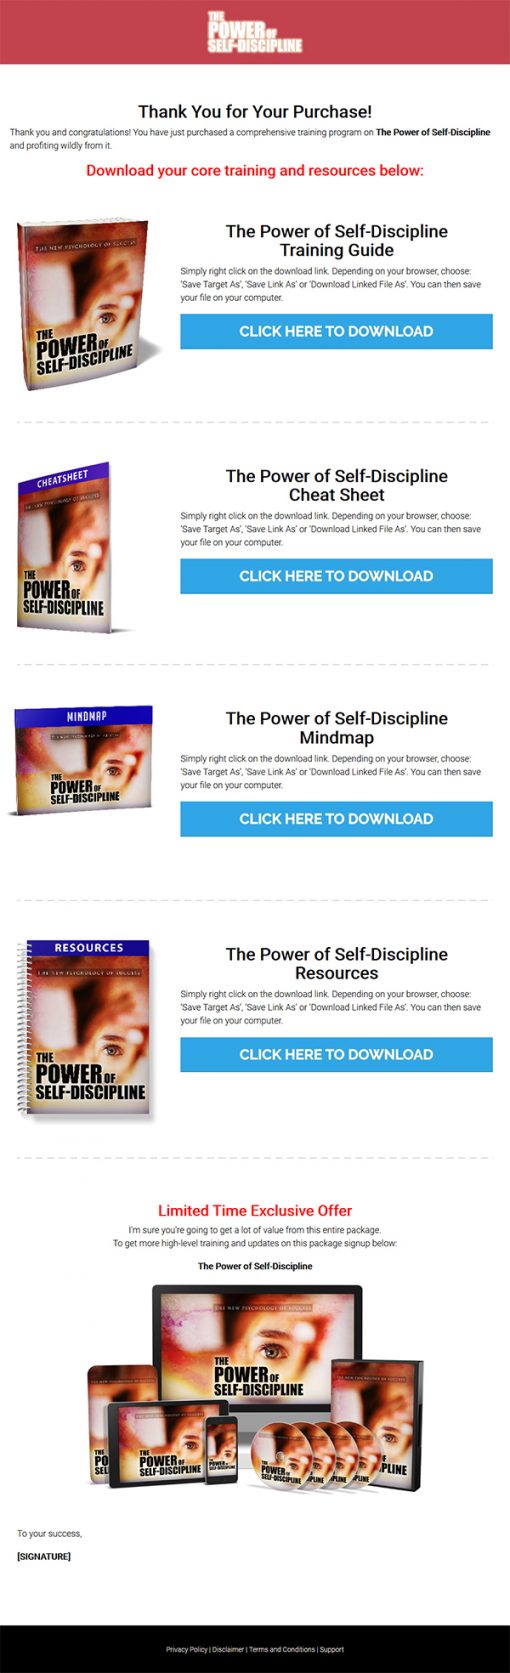 Power of Self Discipline Ebook and Videos MRR